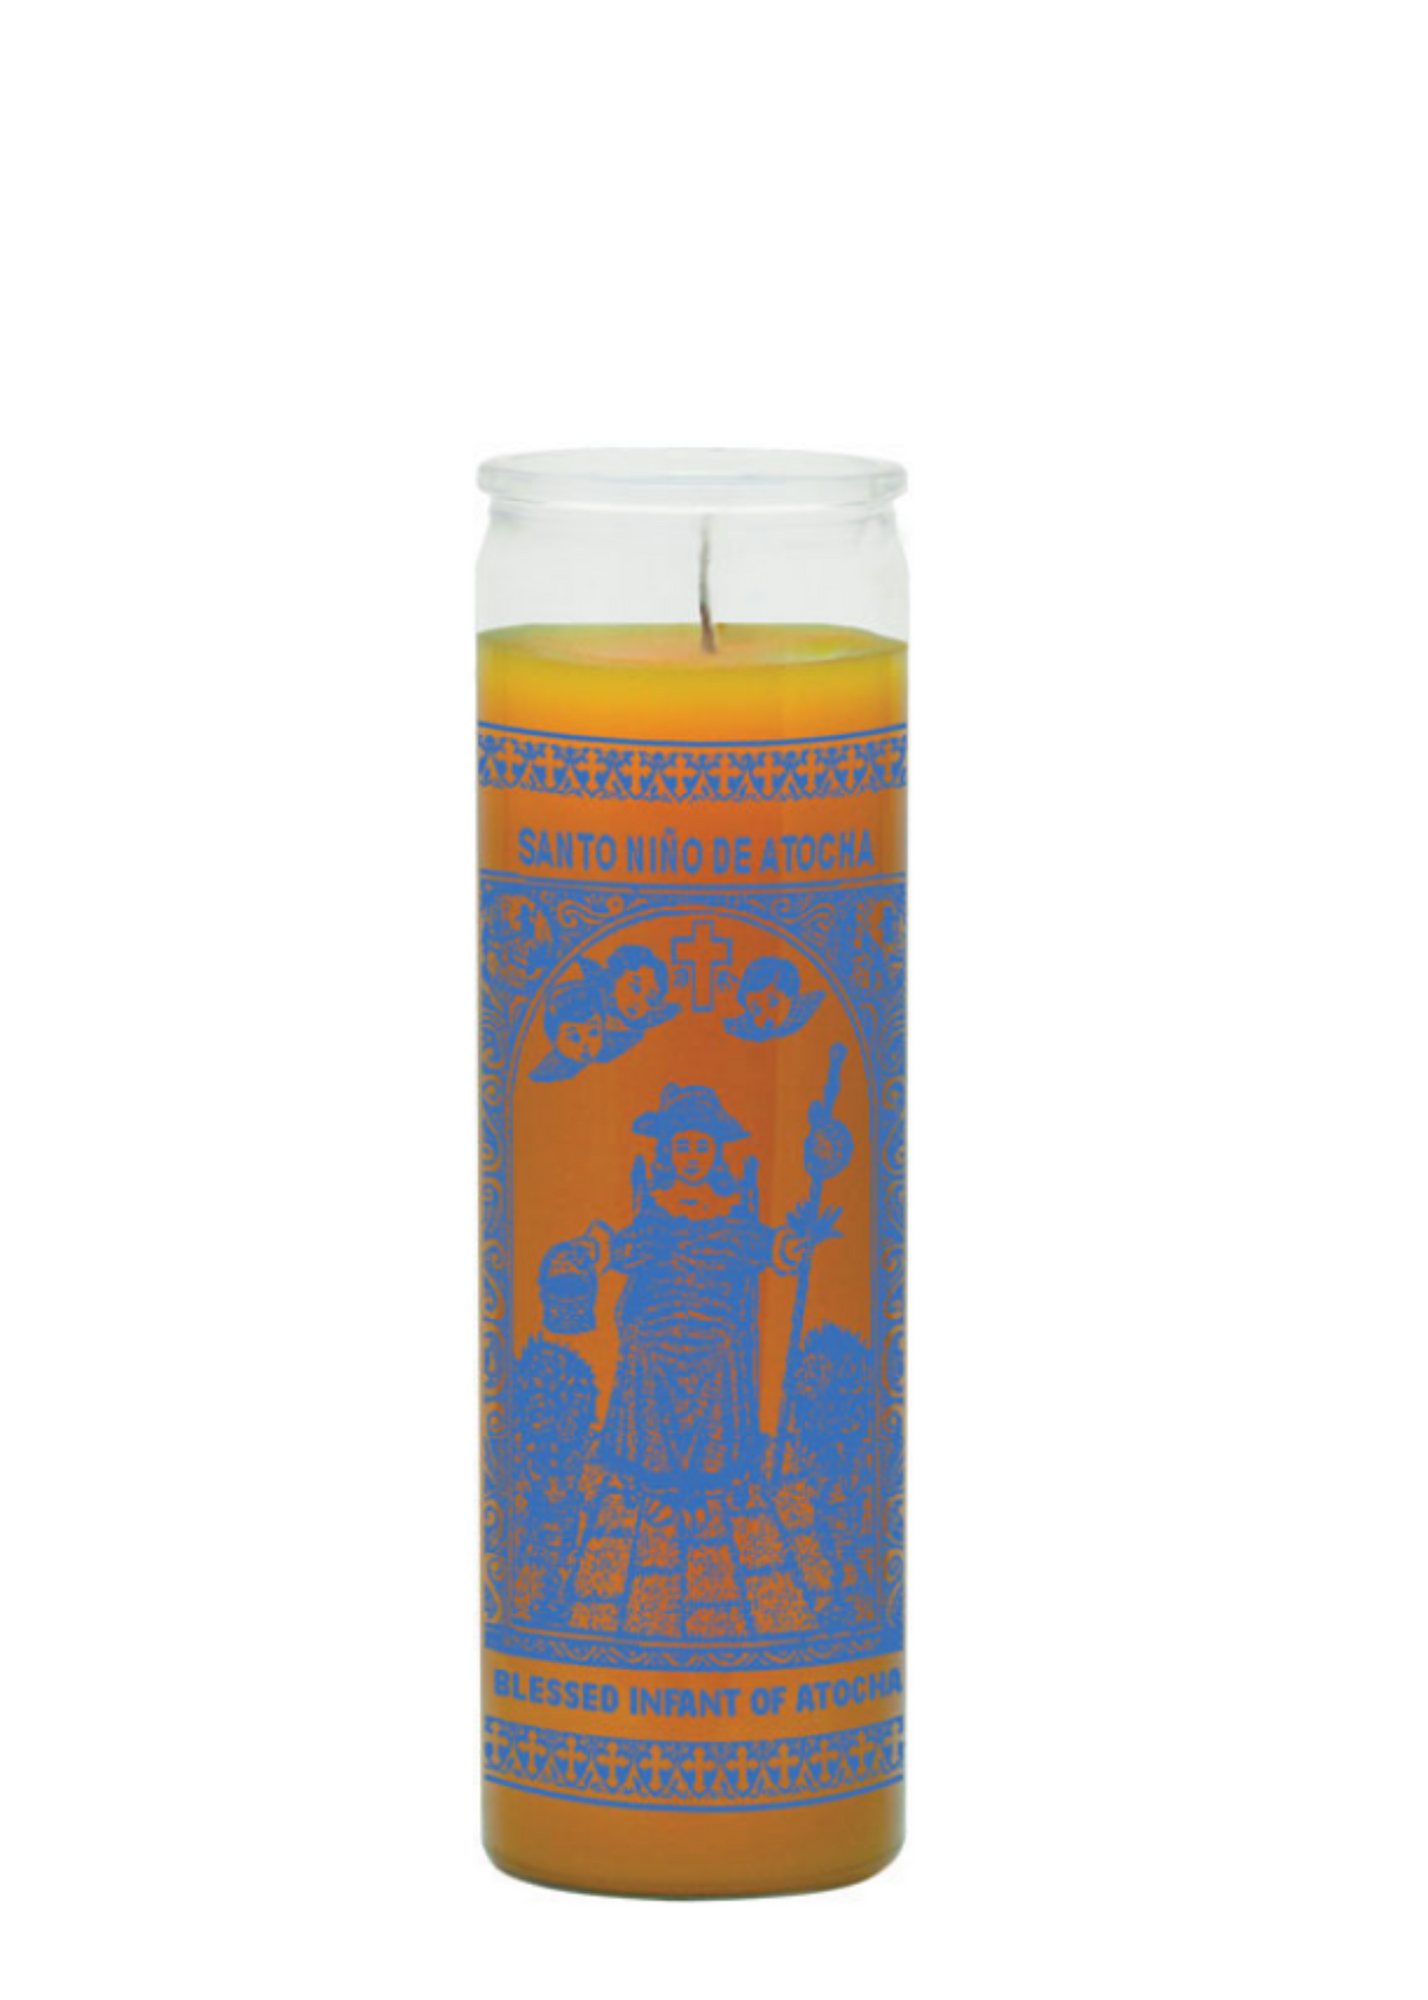 Child of atocha (gold) 1 color 7 day candle